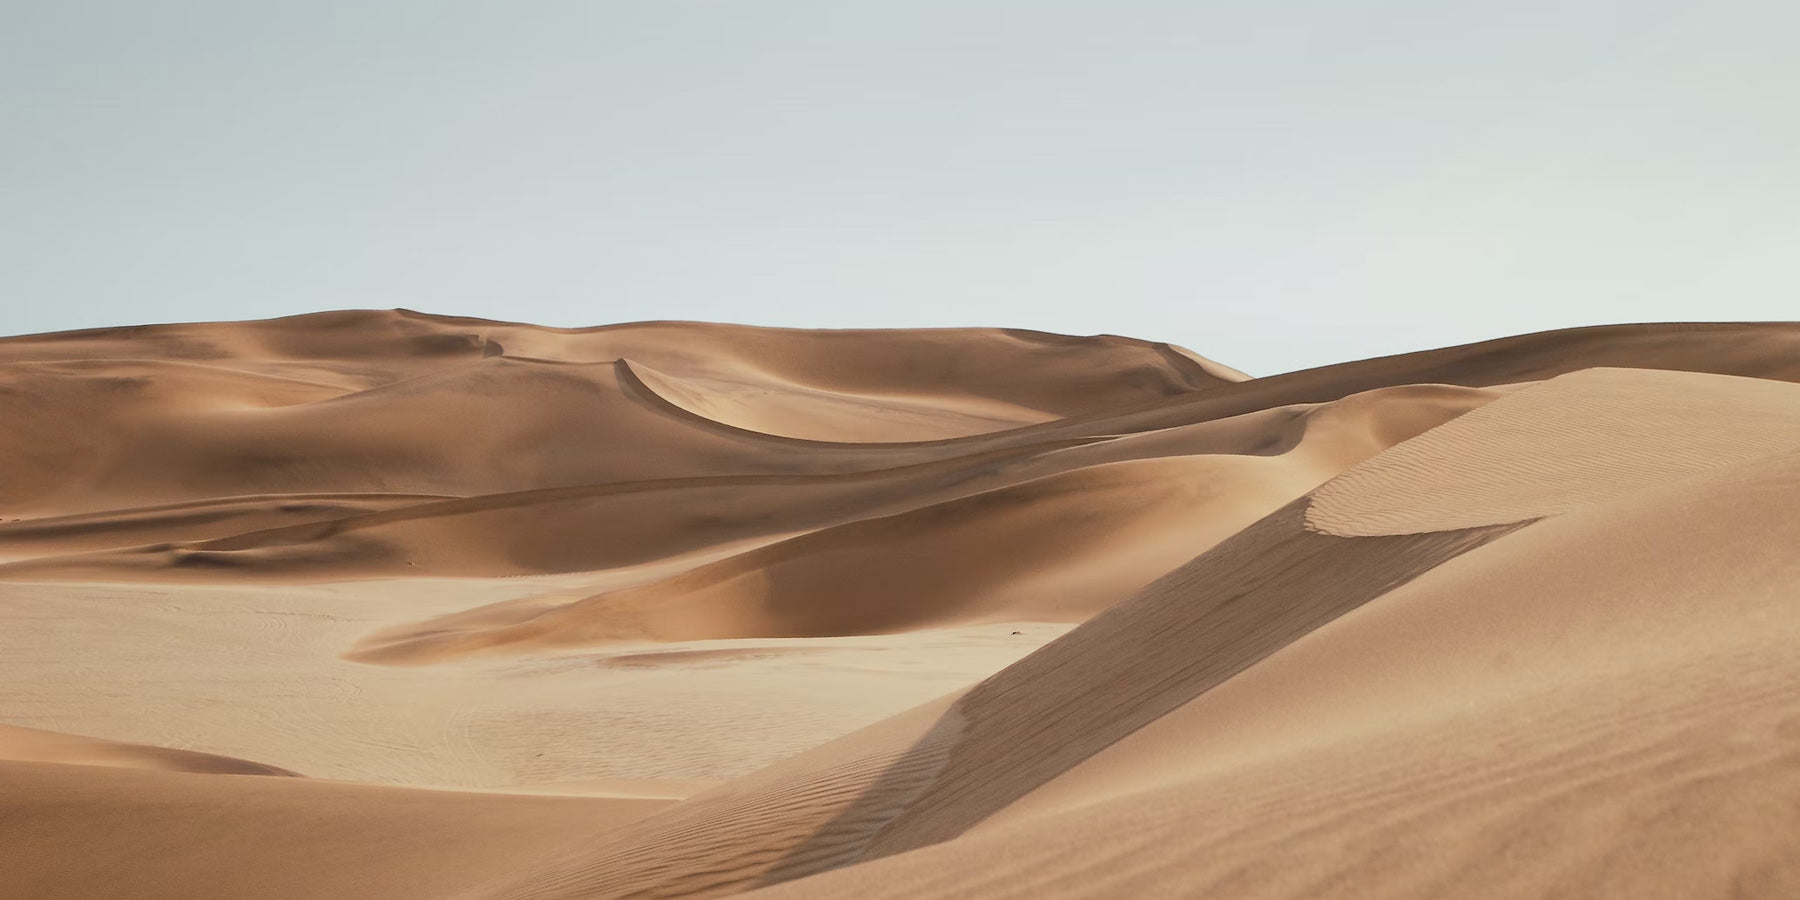 Desert Dunes with clear soft blue sky in the background